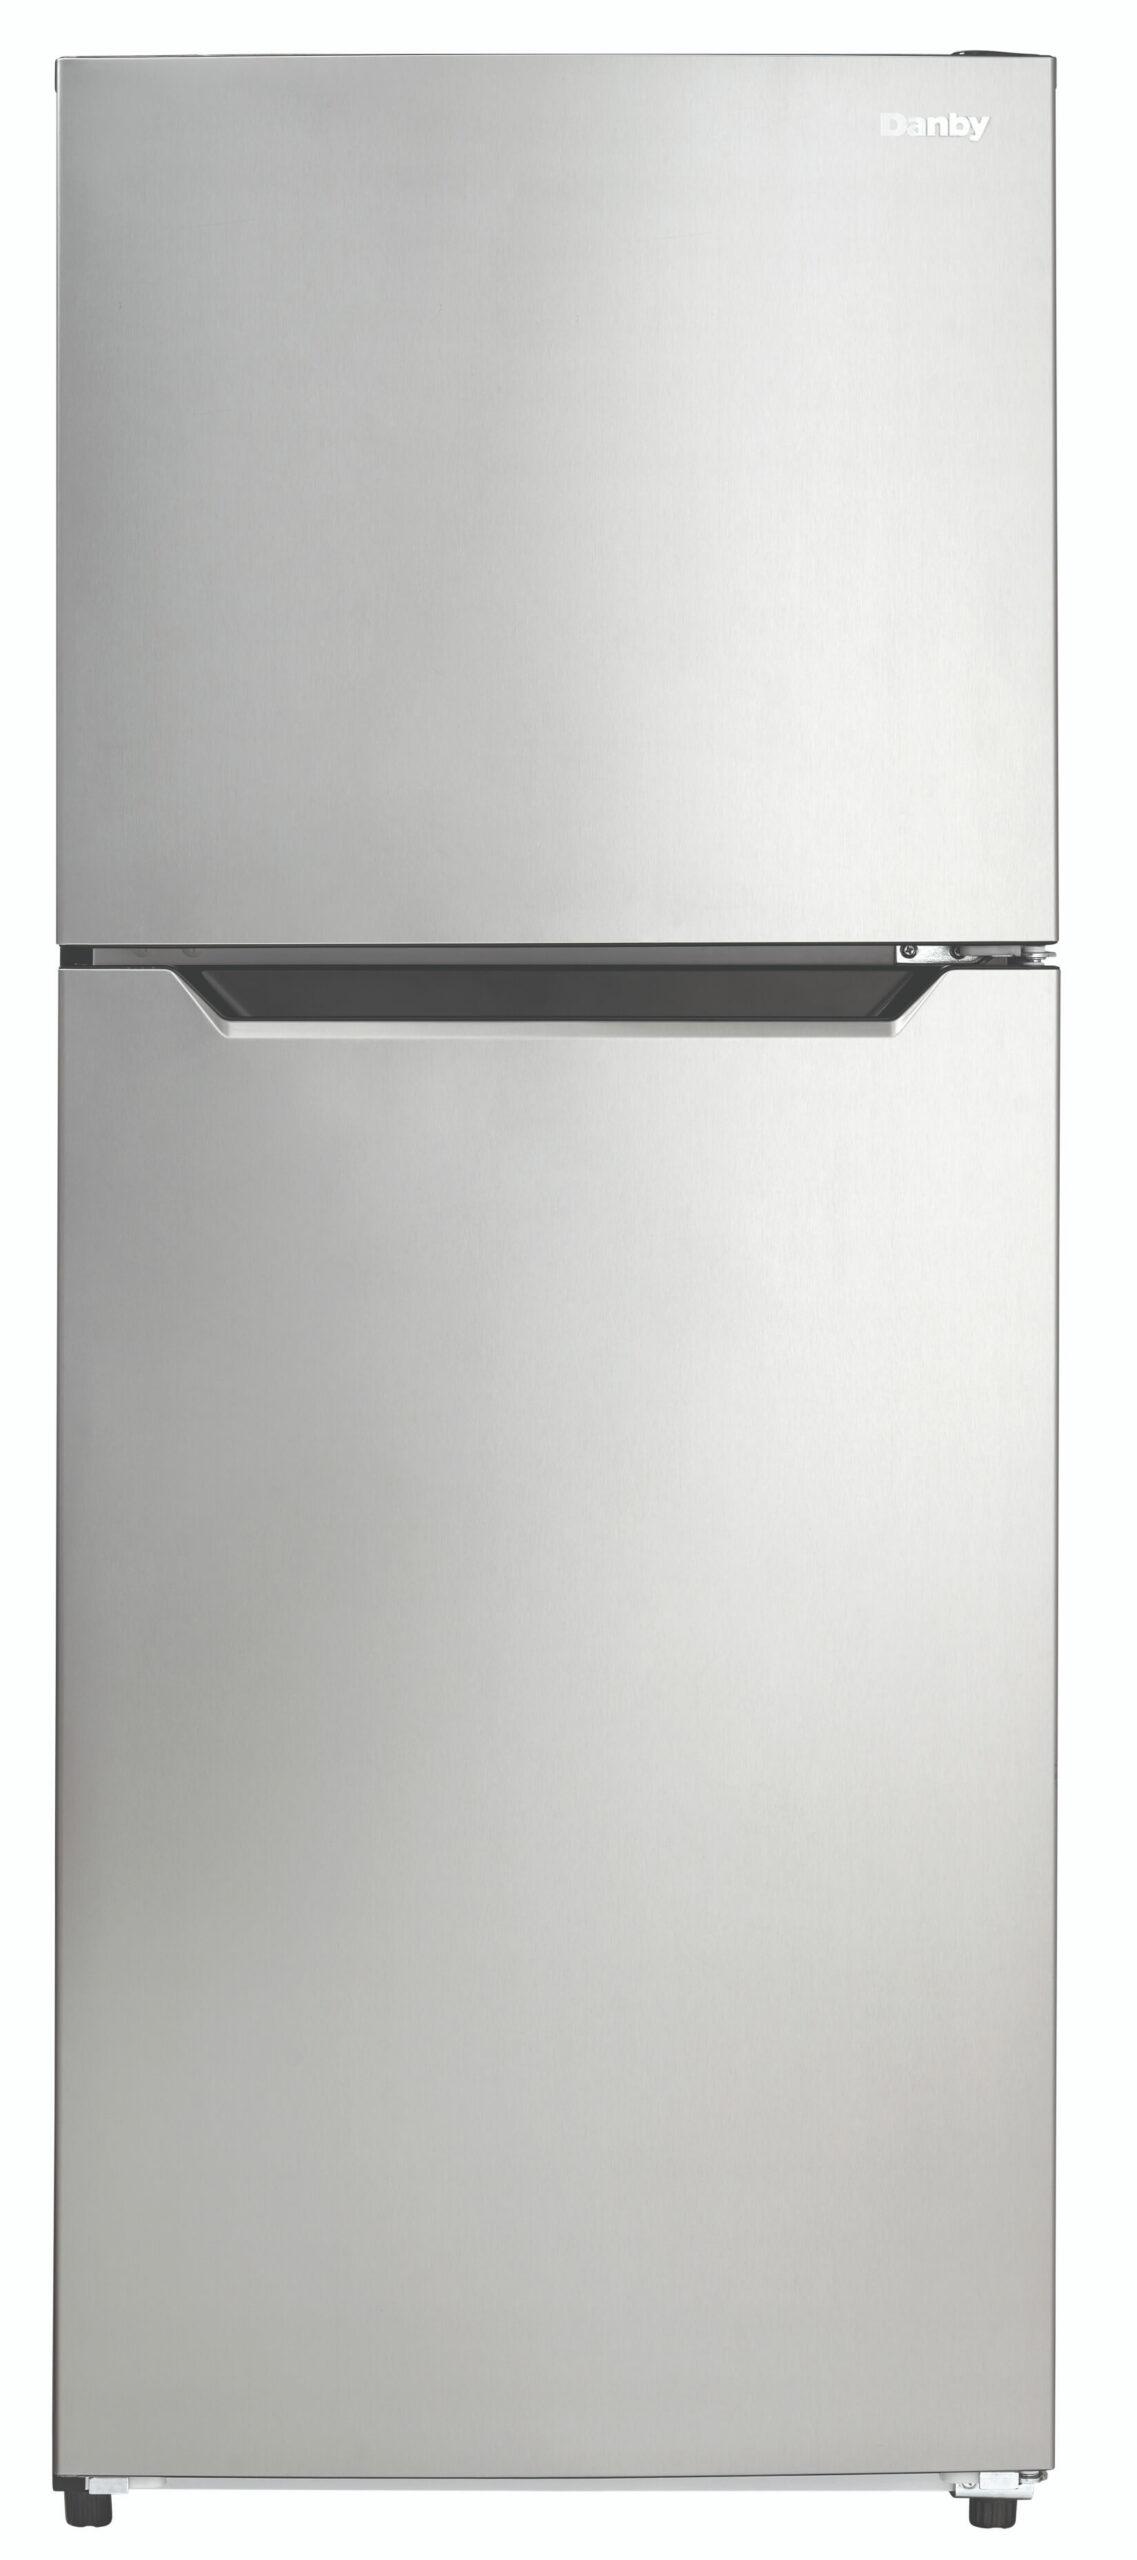 Danby 10.1 cu. ft. Top Mount Apartment Size Fridge in Stainless Steel